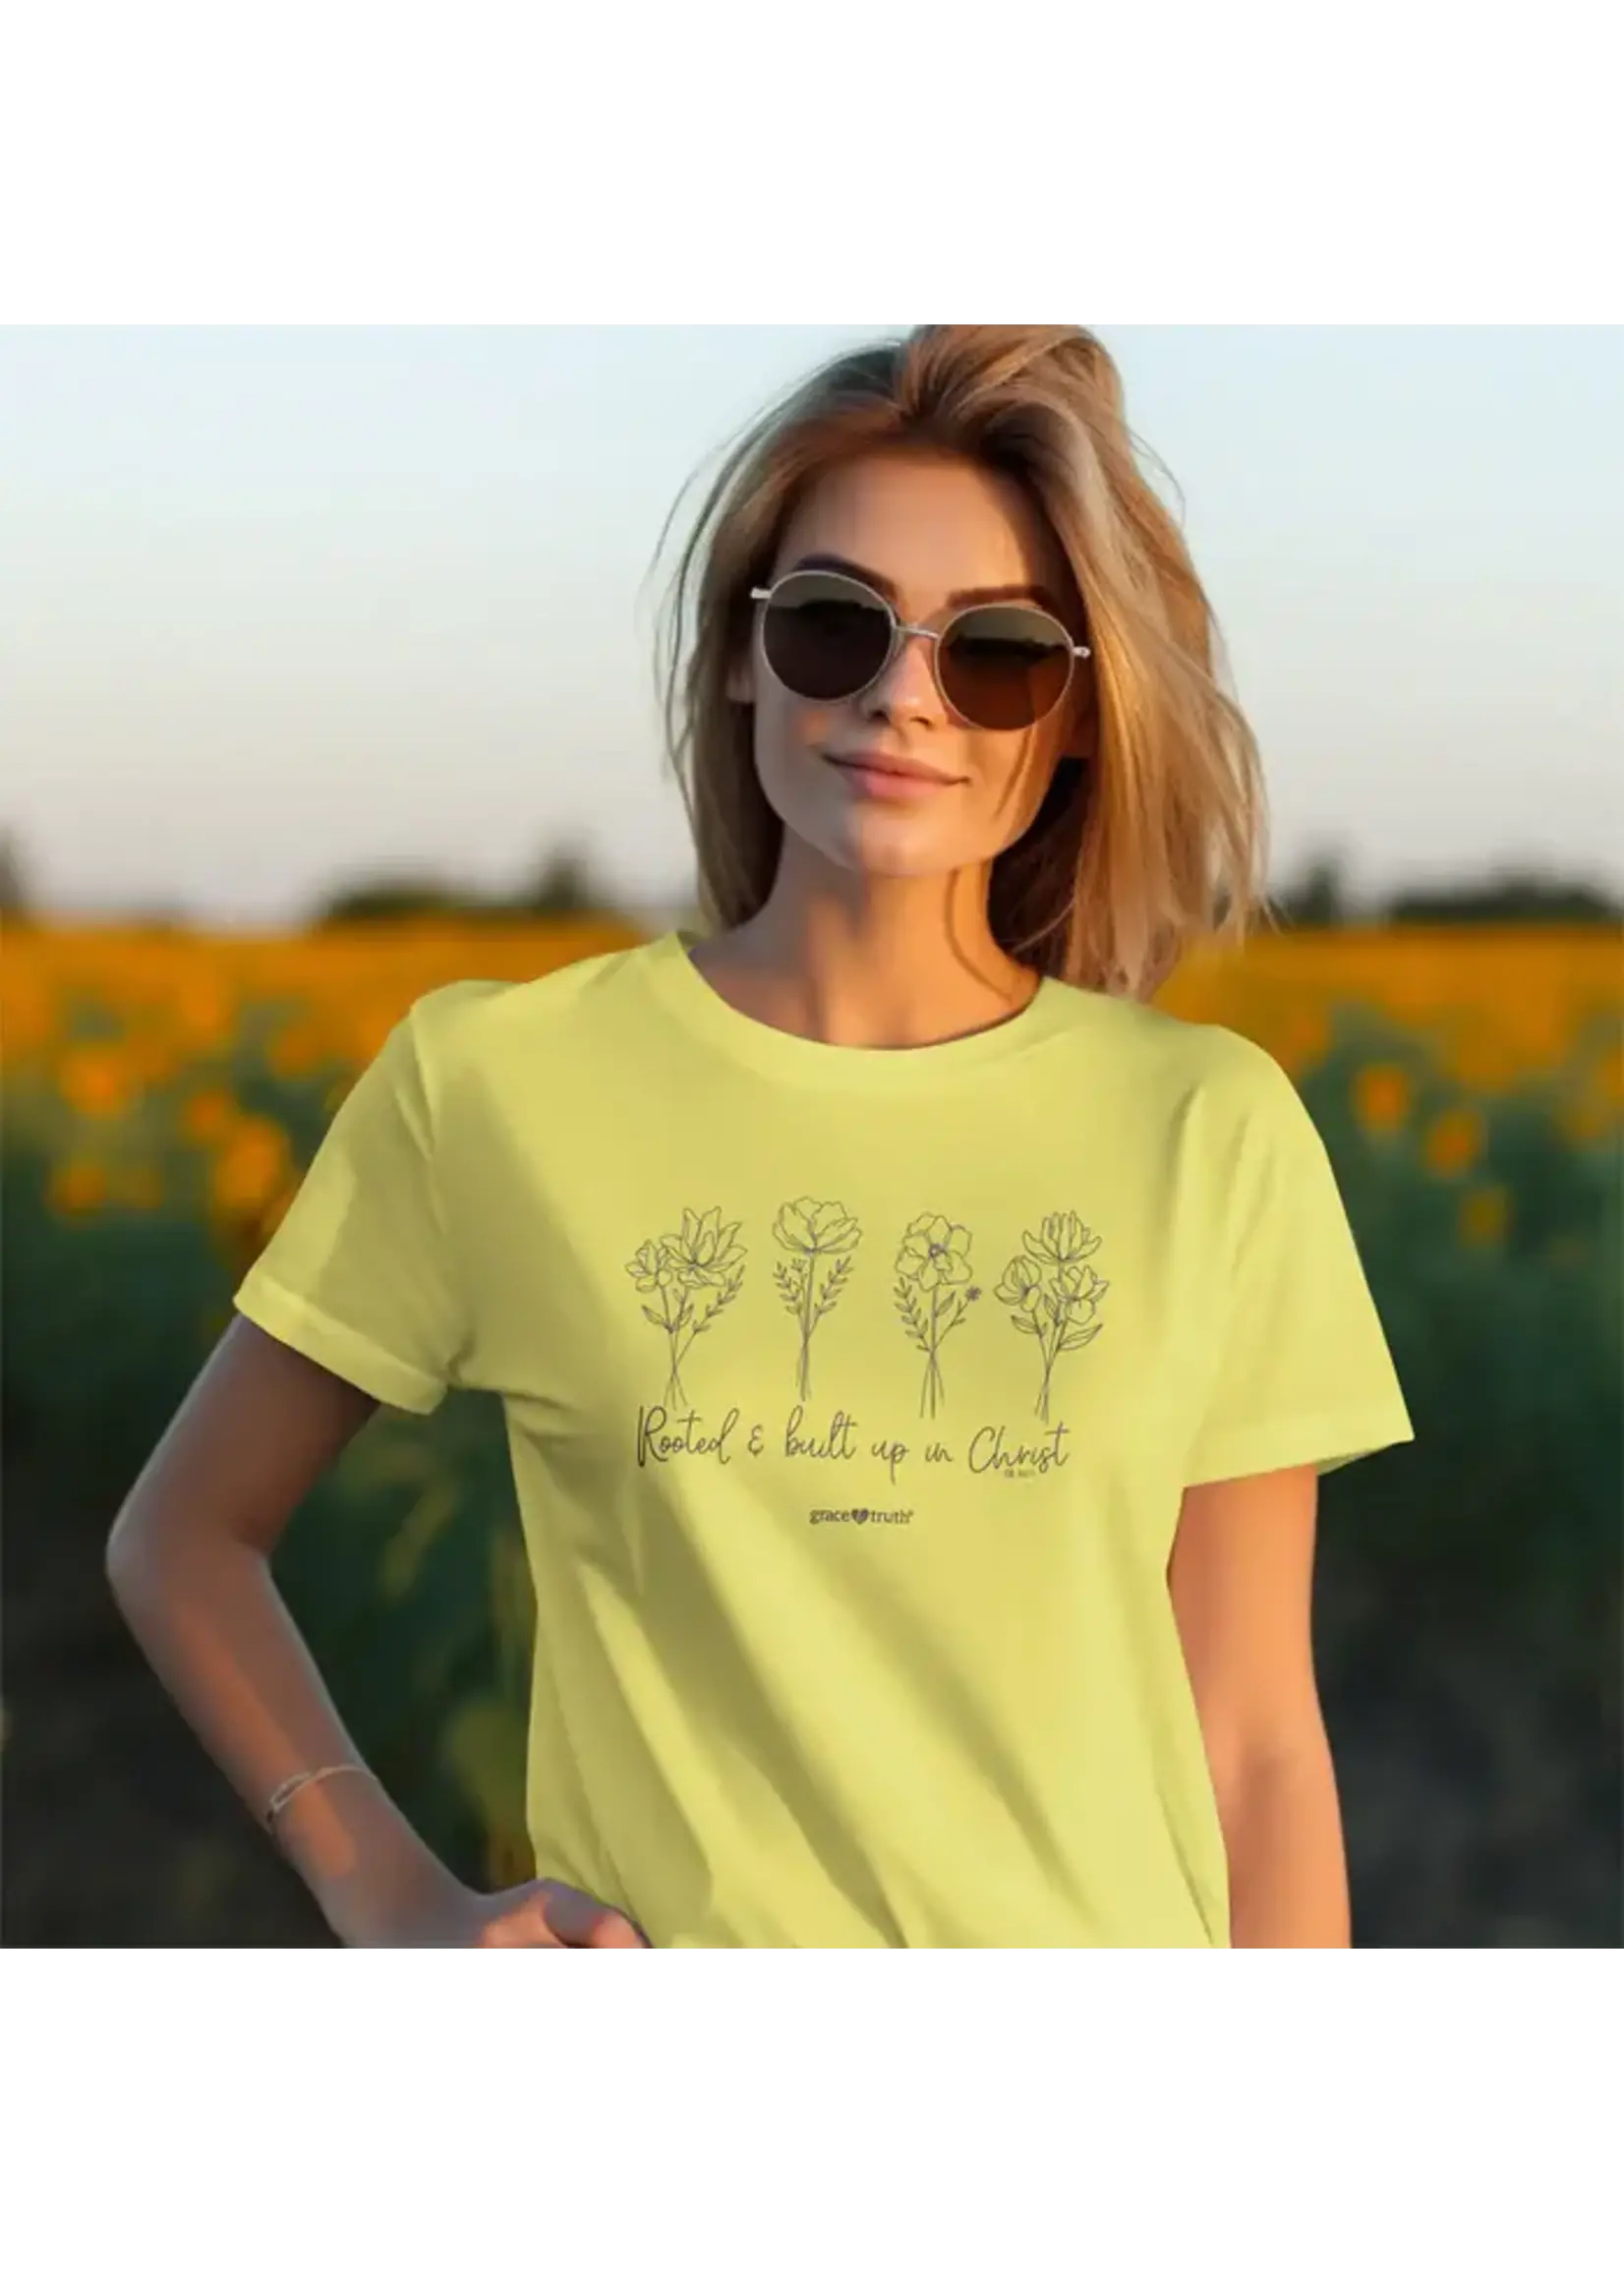 Grace & Truth "Rooted & Built Up In Christ" Women's Tee